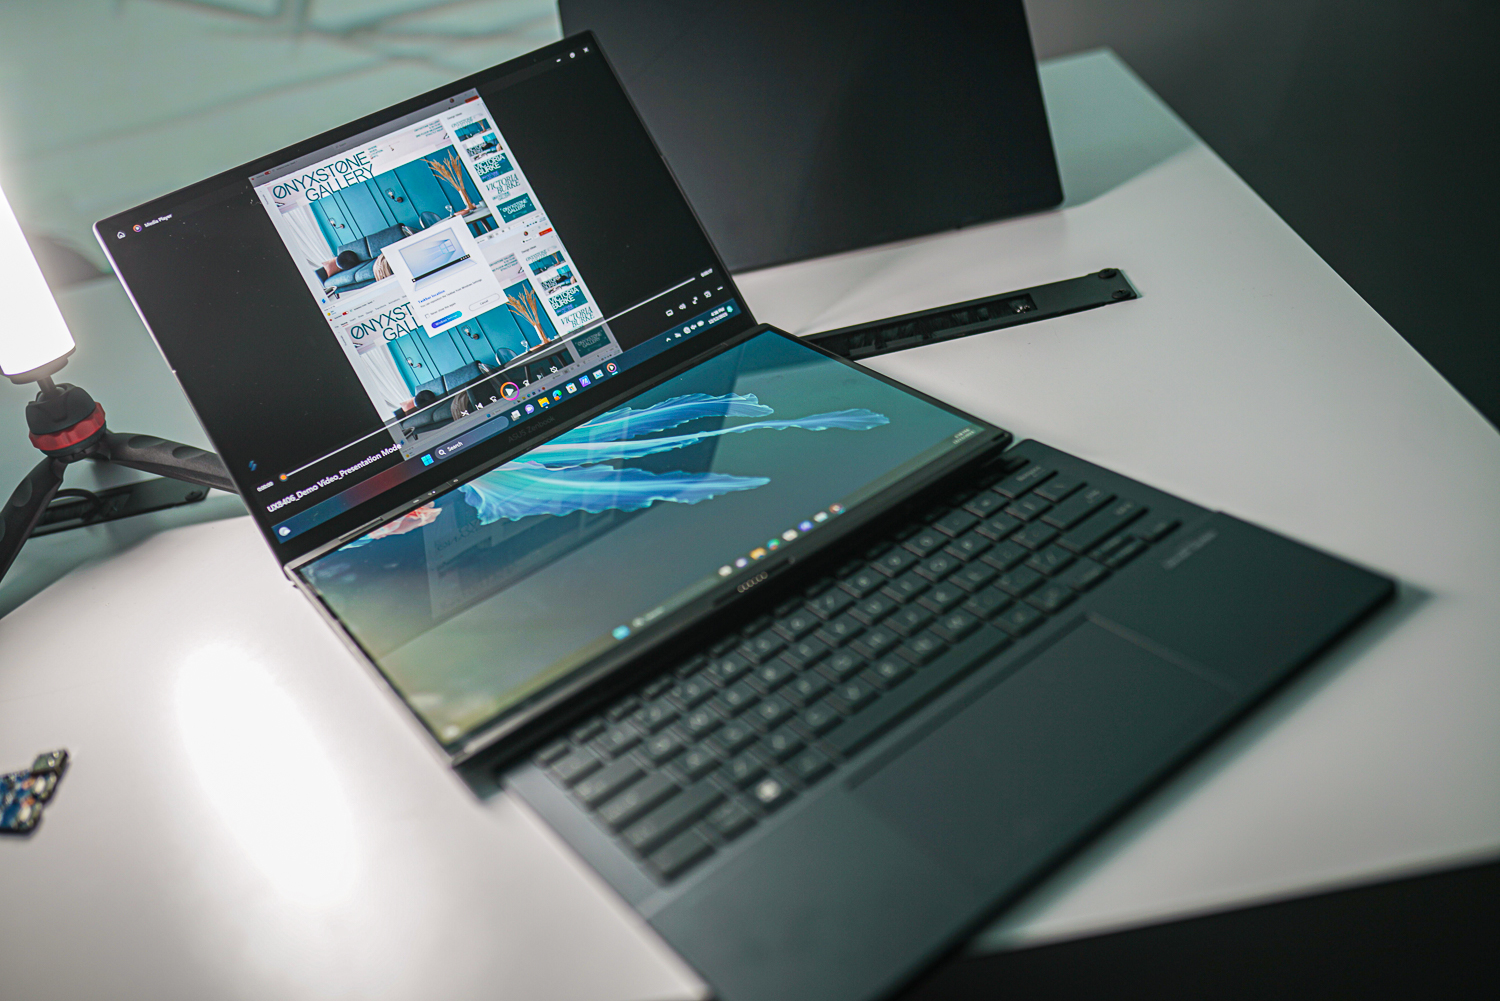 The Zenbook Duo with the keyboard detached.